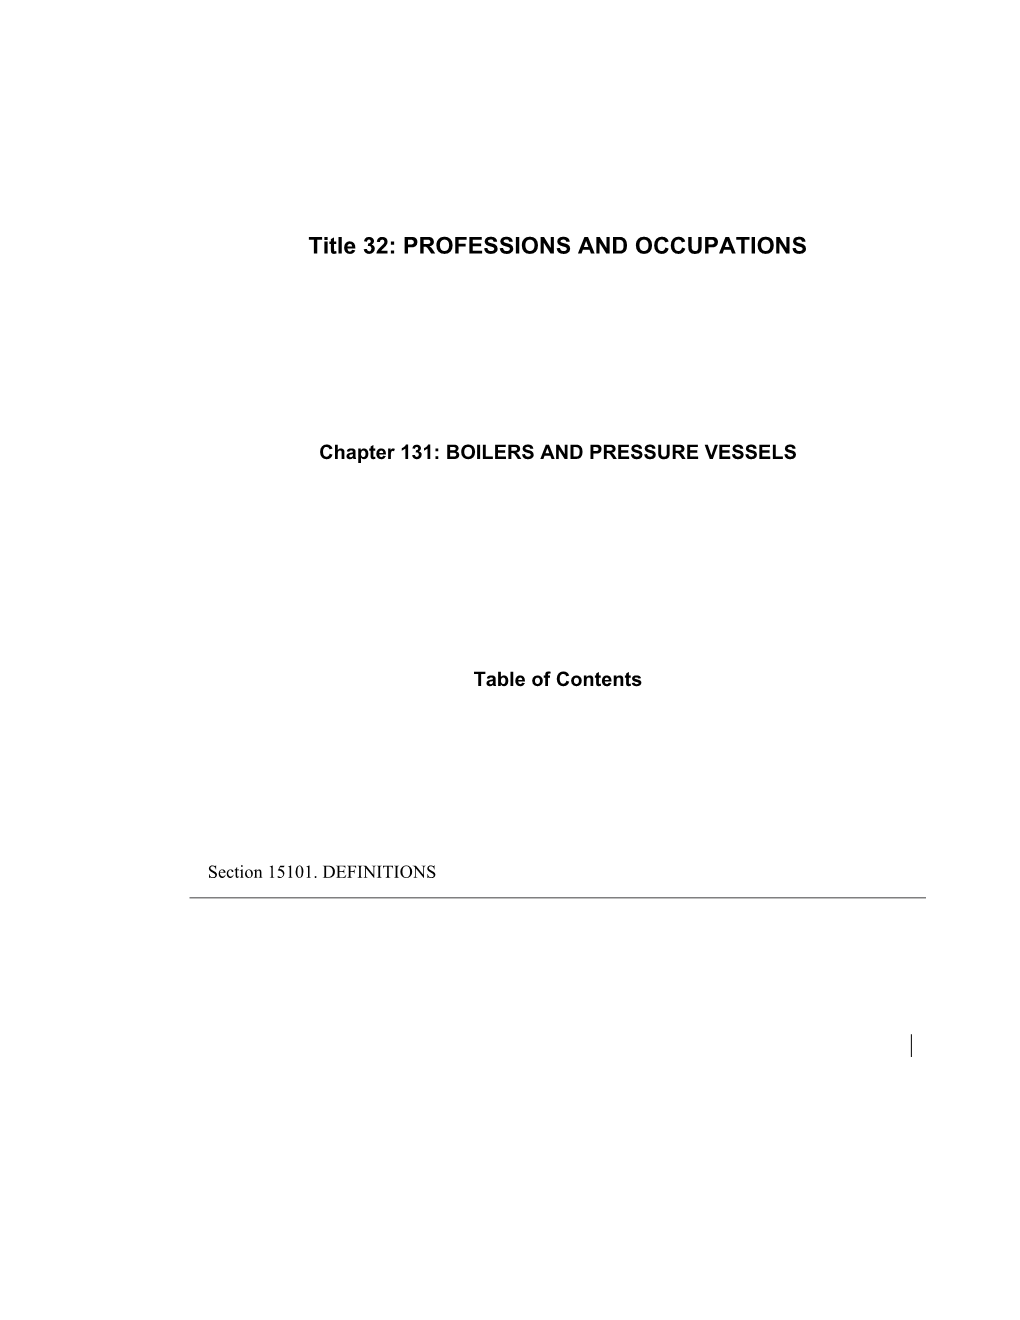 MRS Title 32, Chapter 131: BOILERS and PRESSURE VESSELS